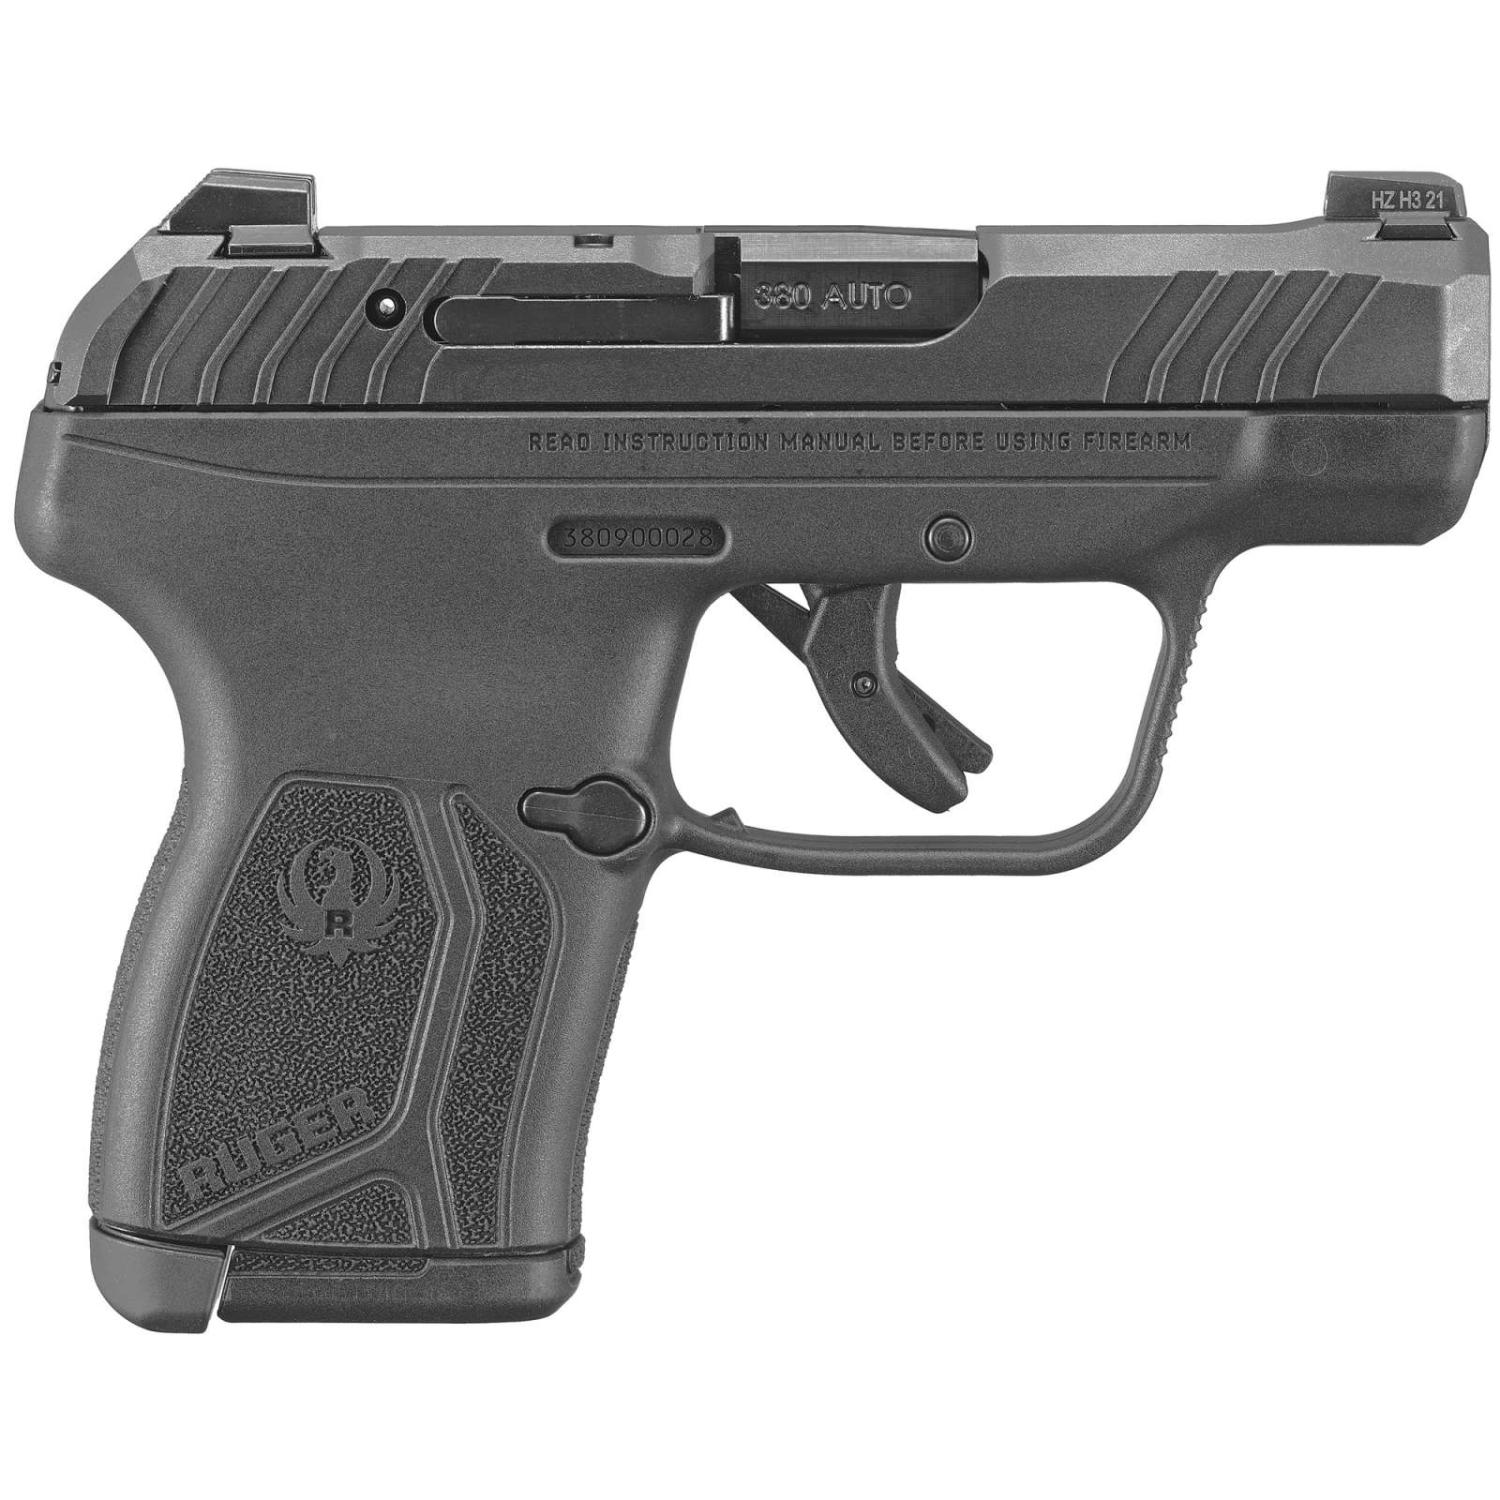 Ruger LCP MAX 380ACP 2.8" Barrel 10 Rounds CBLT - $375.99 ($7.99 S/H on Firearms)